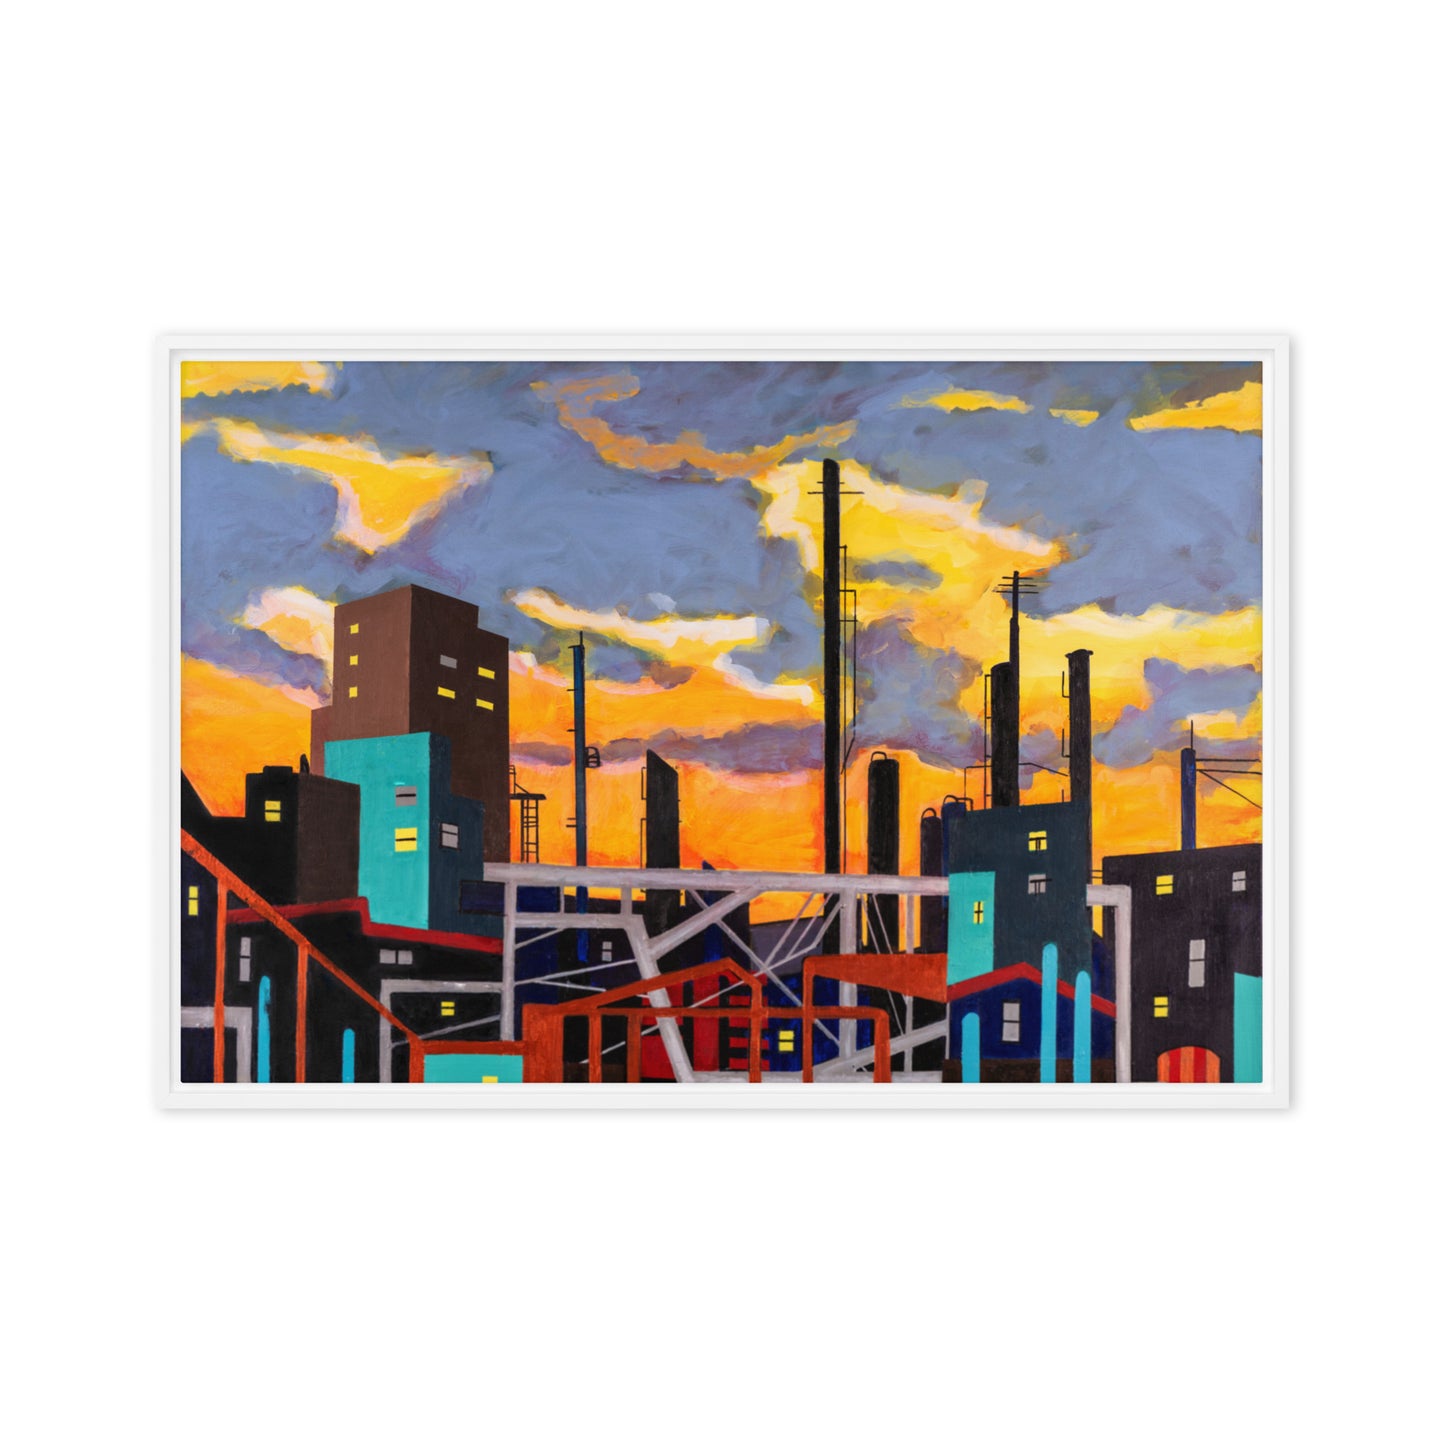 Industrial Scene with Wild Sky- Framed canvas